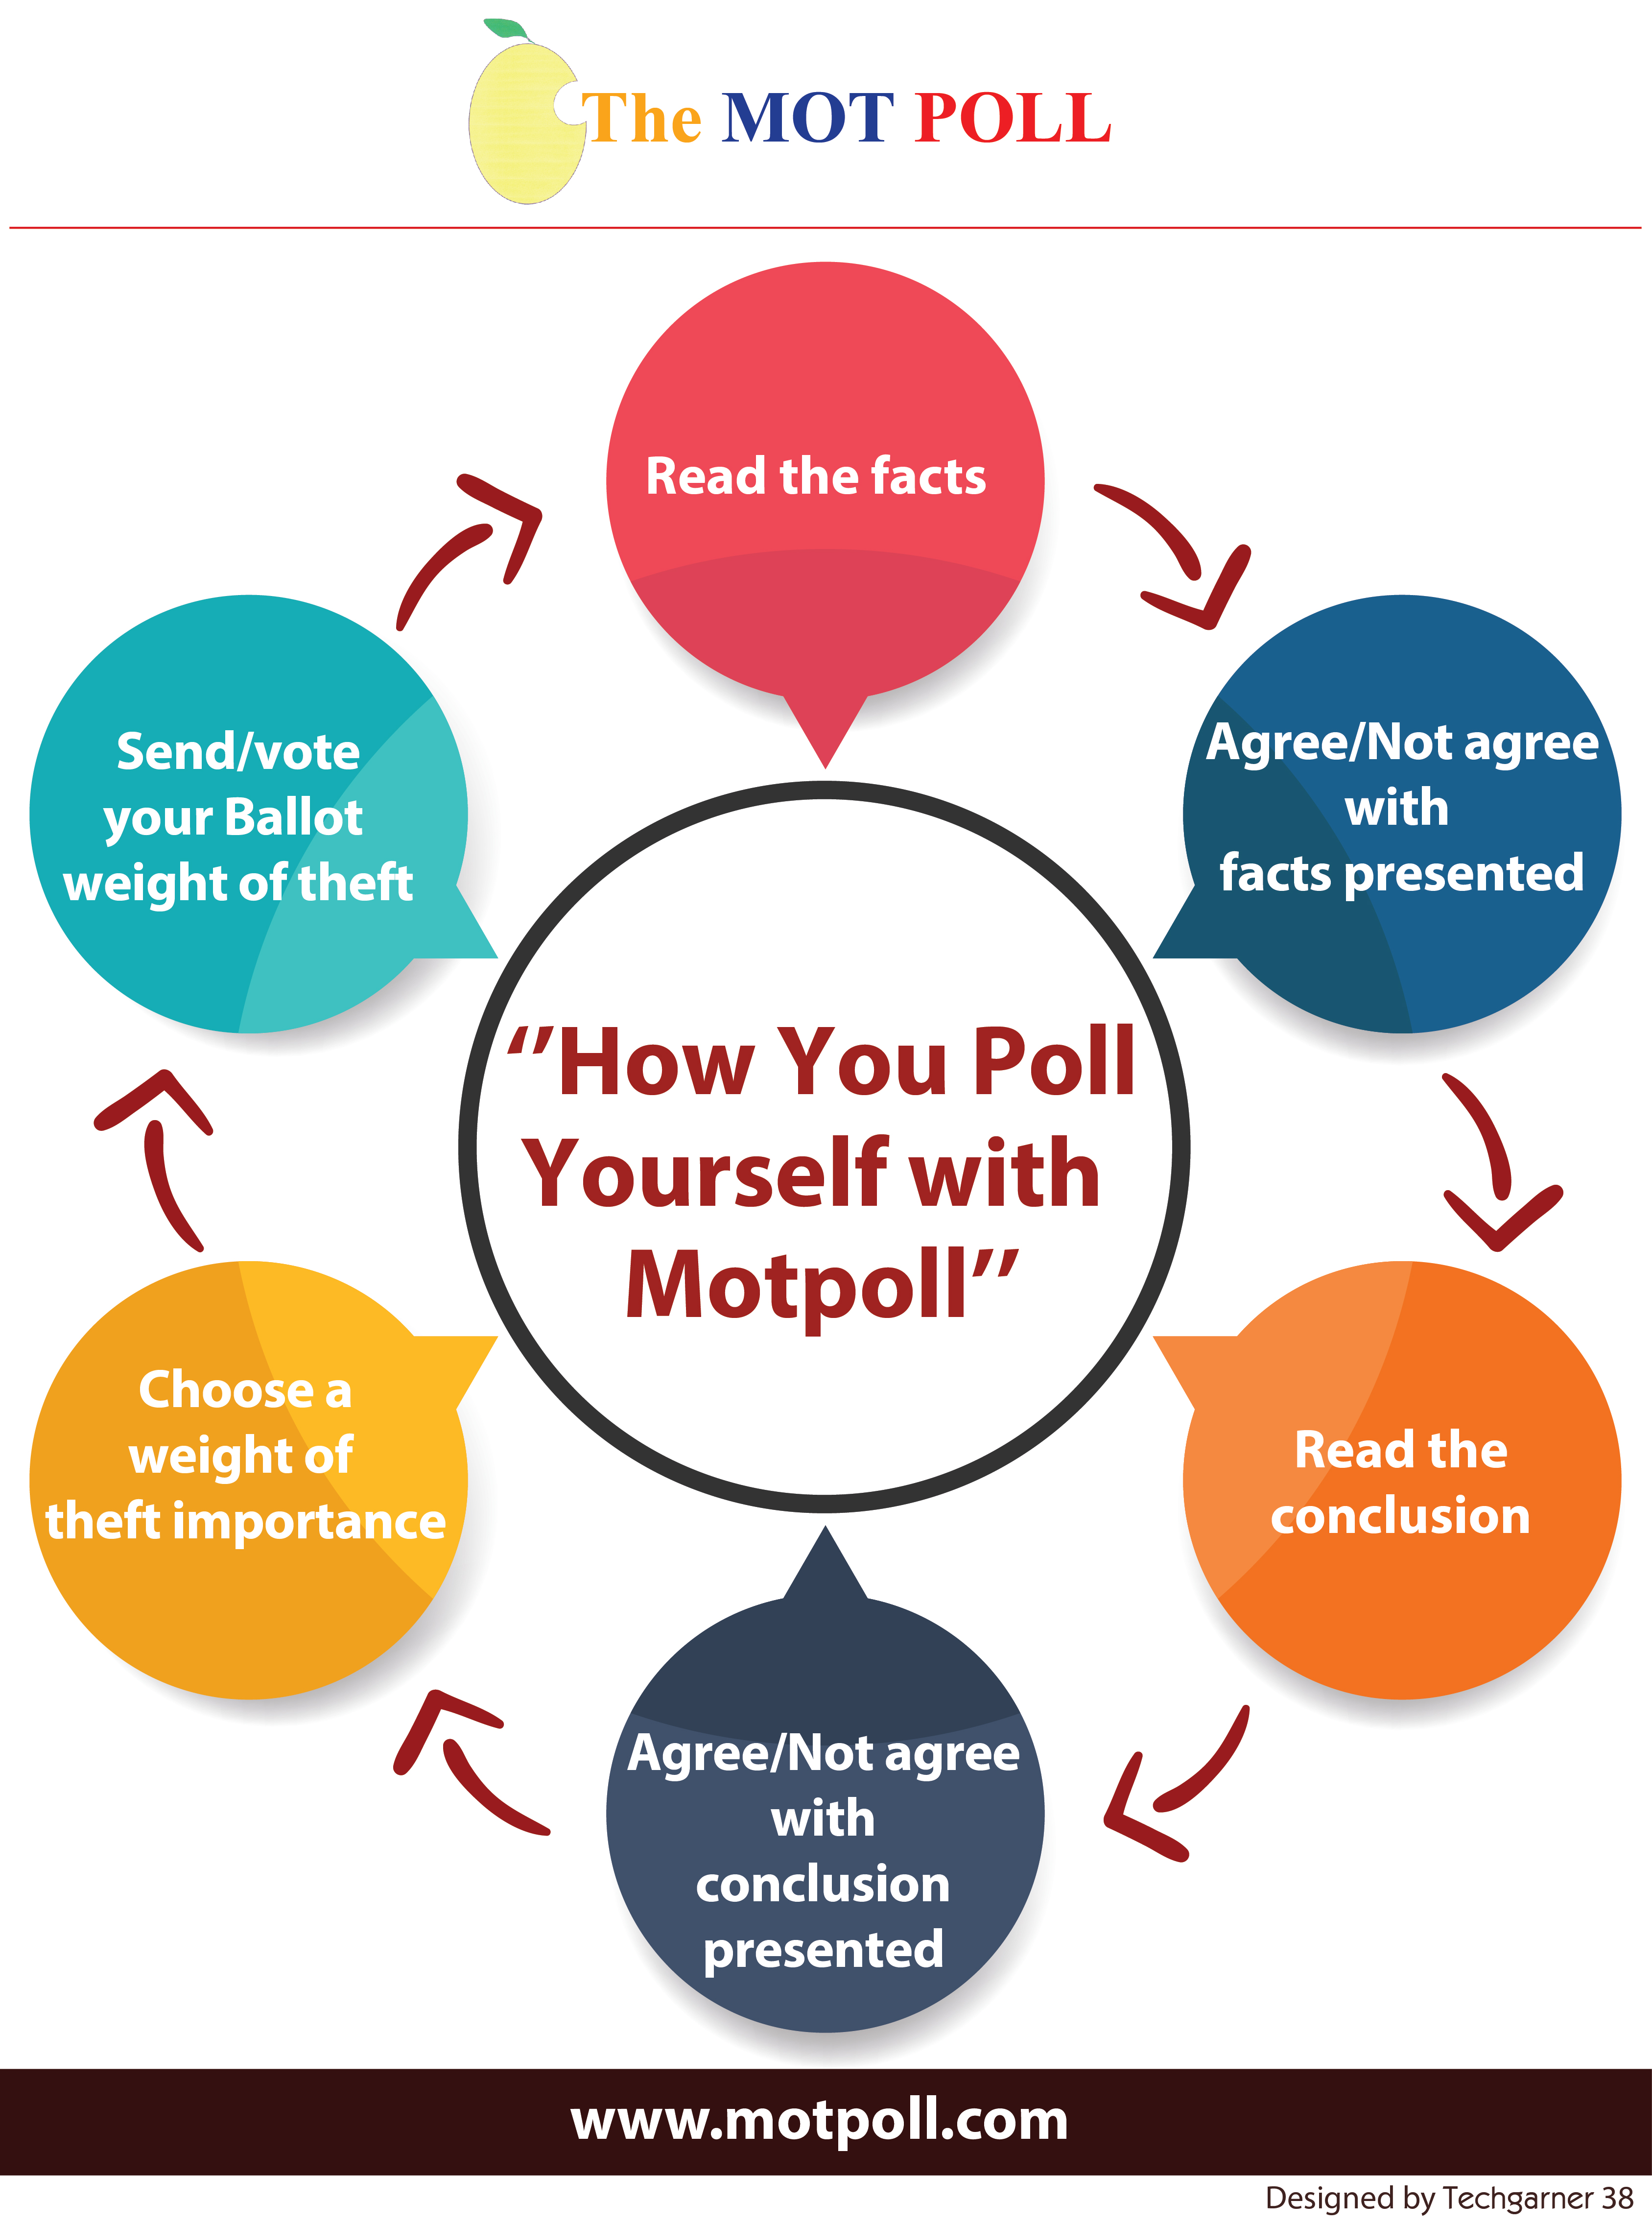 How You Poll Yourself with MOTpoll.com